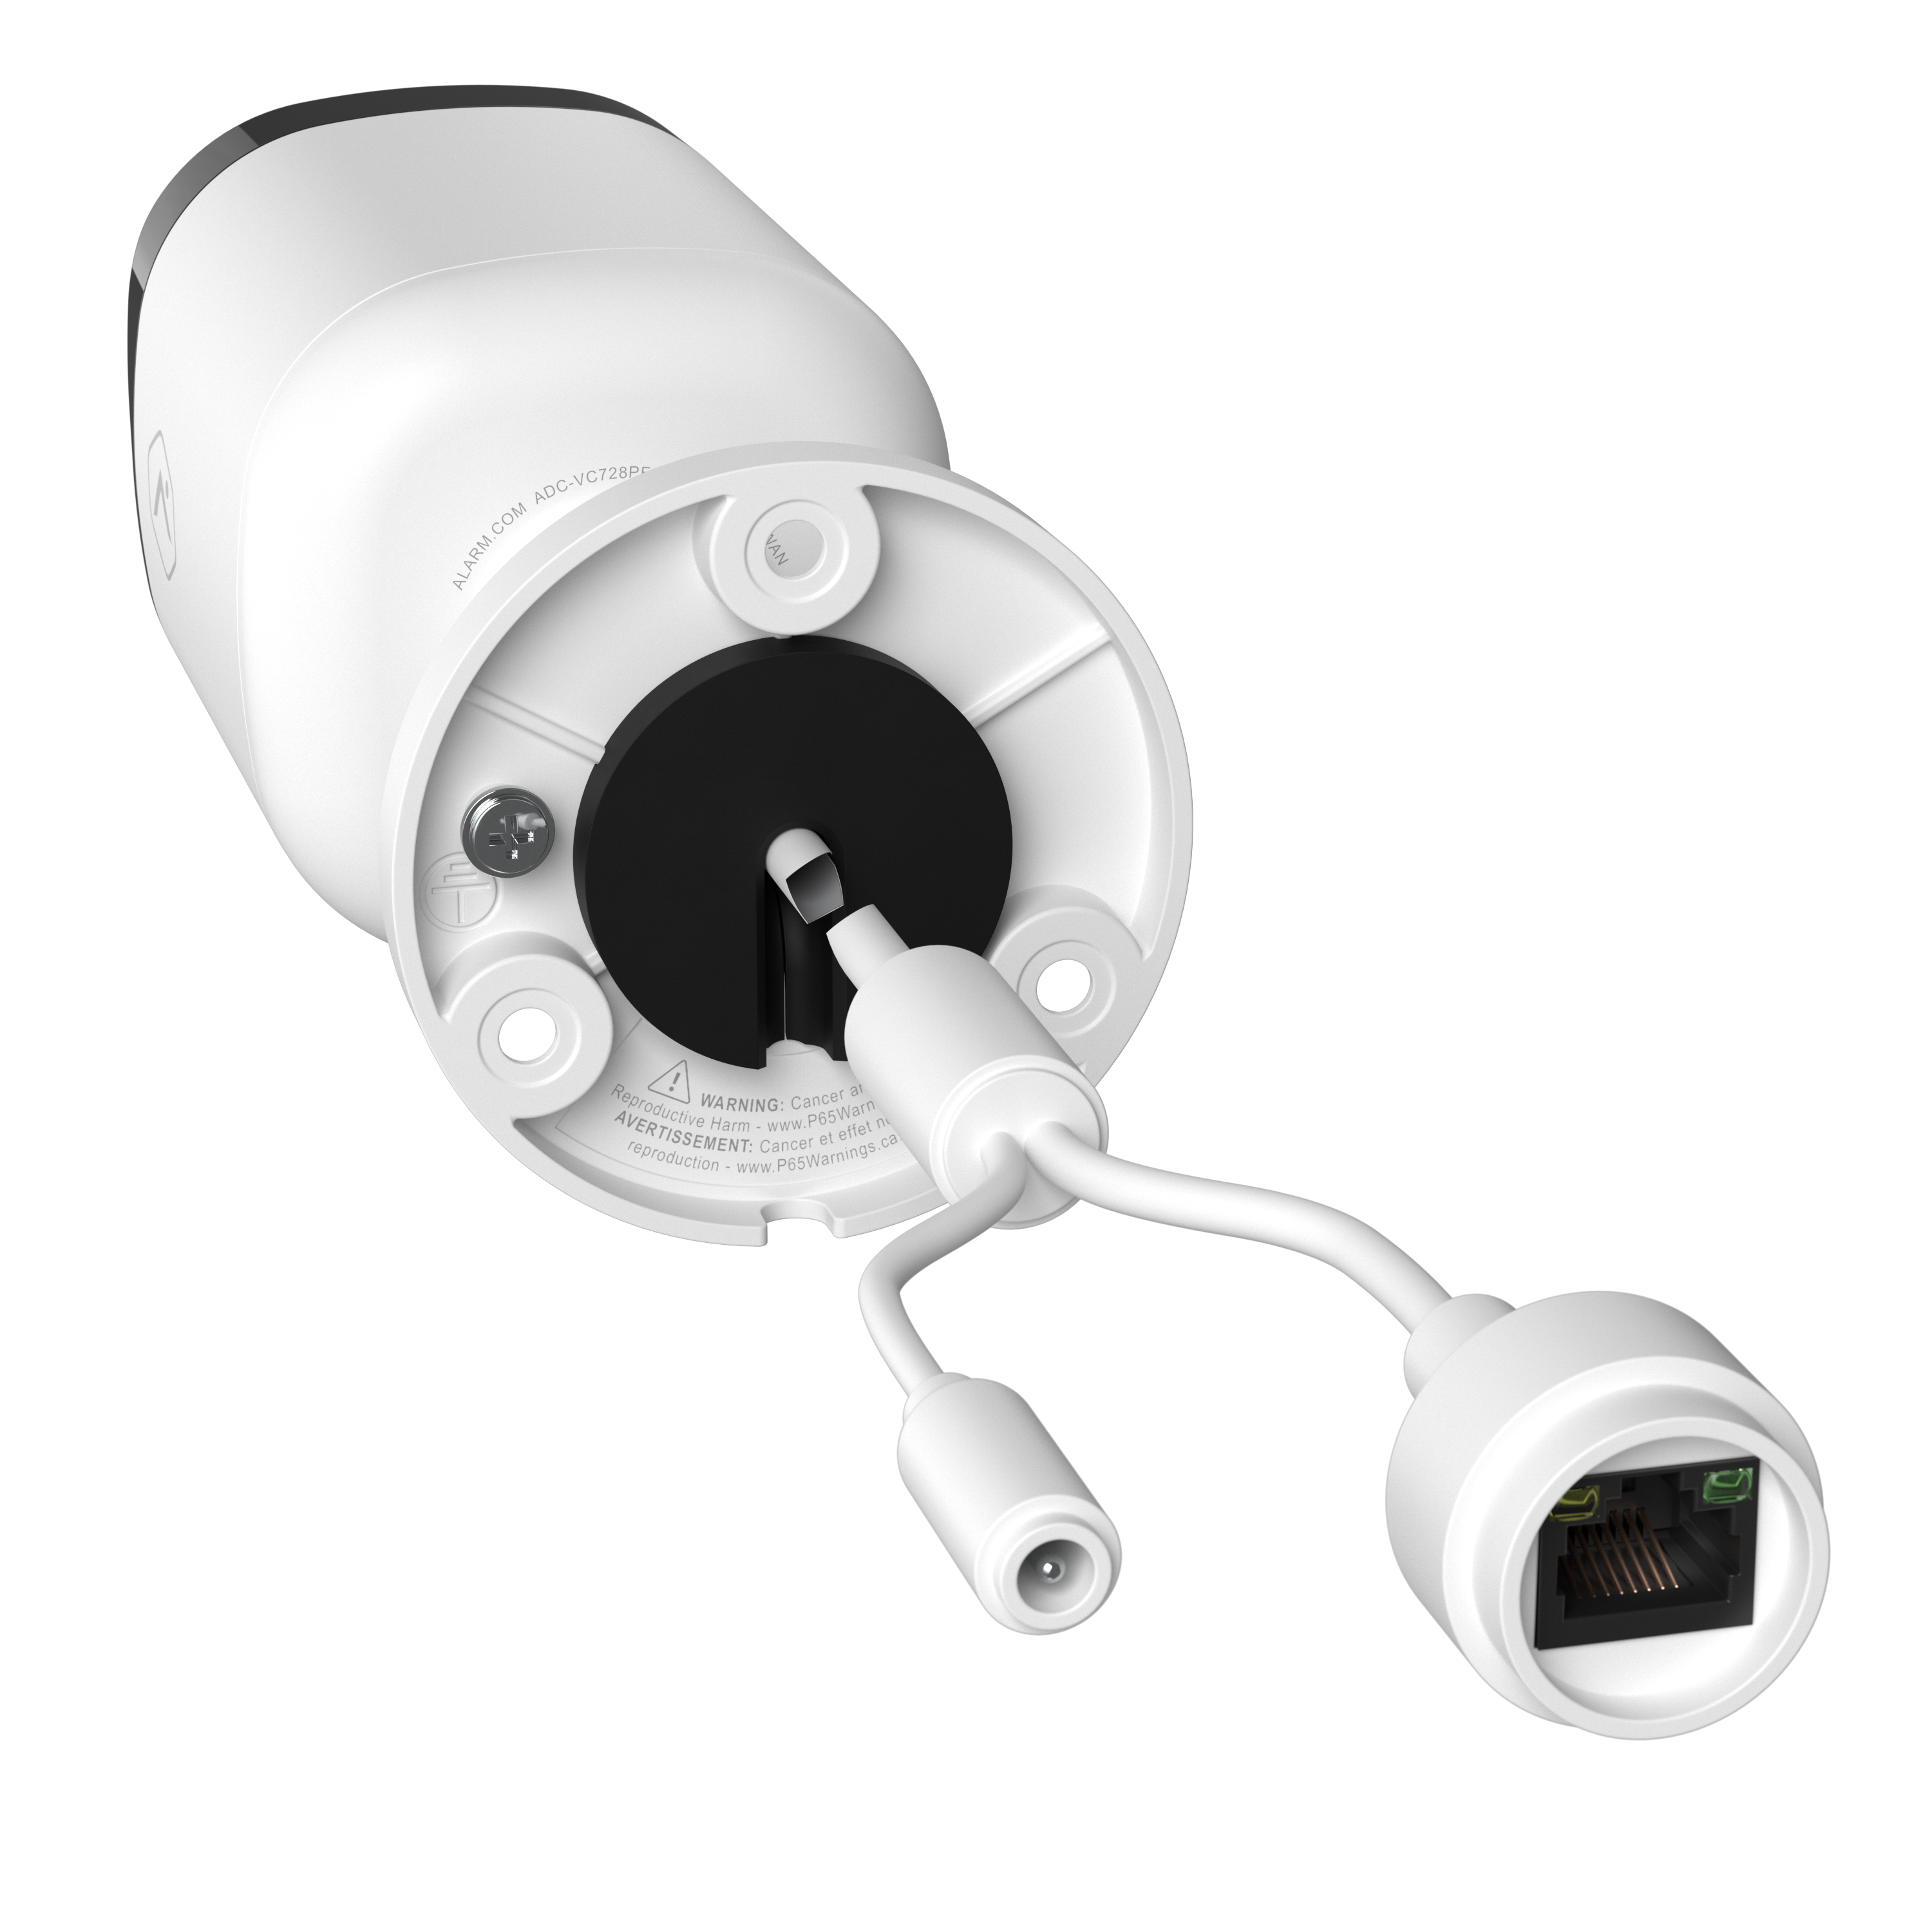 VC728 Outdoor Security Camera